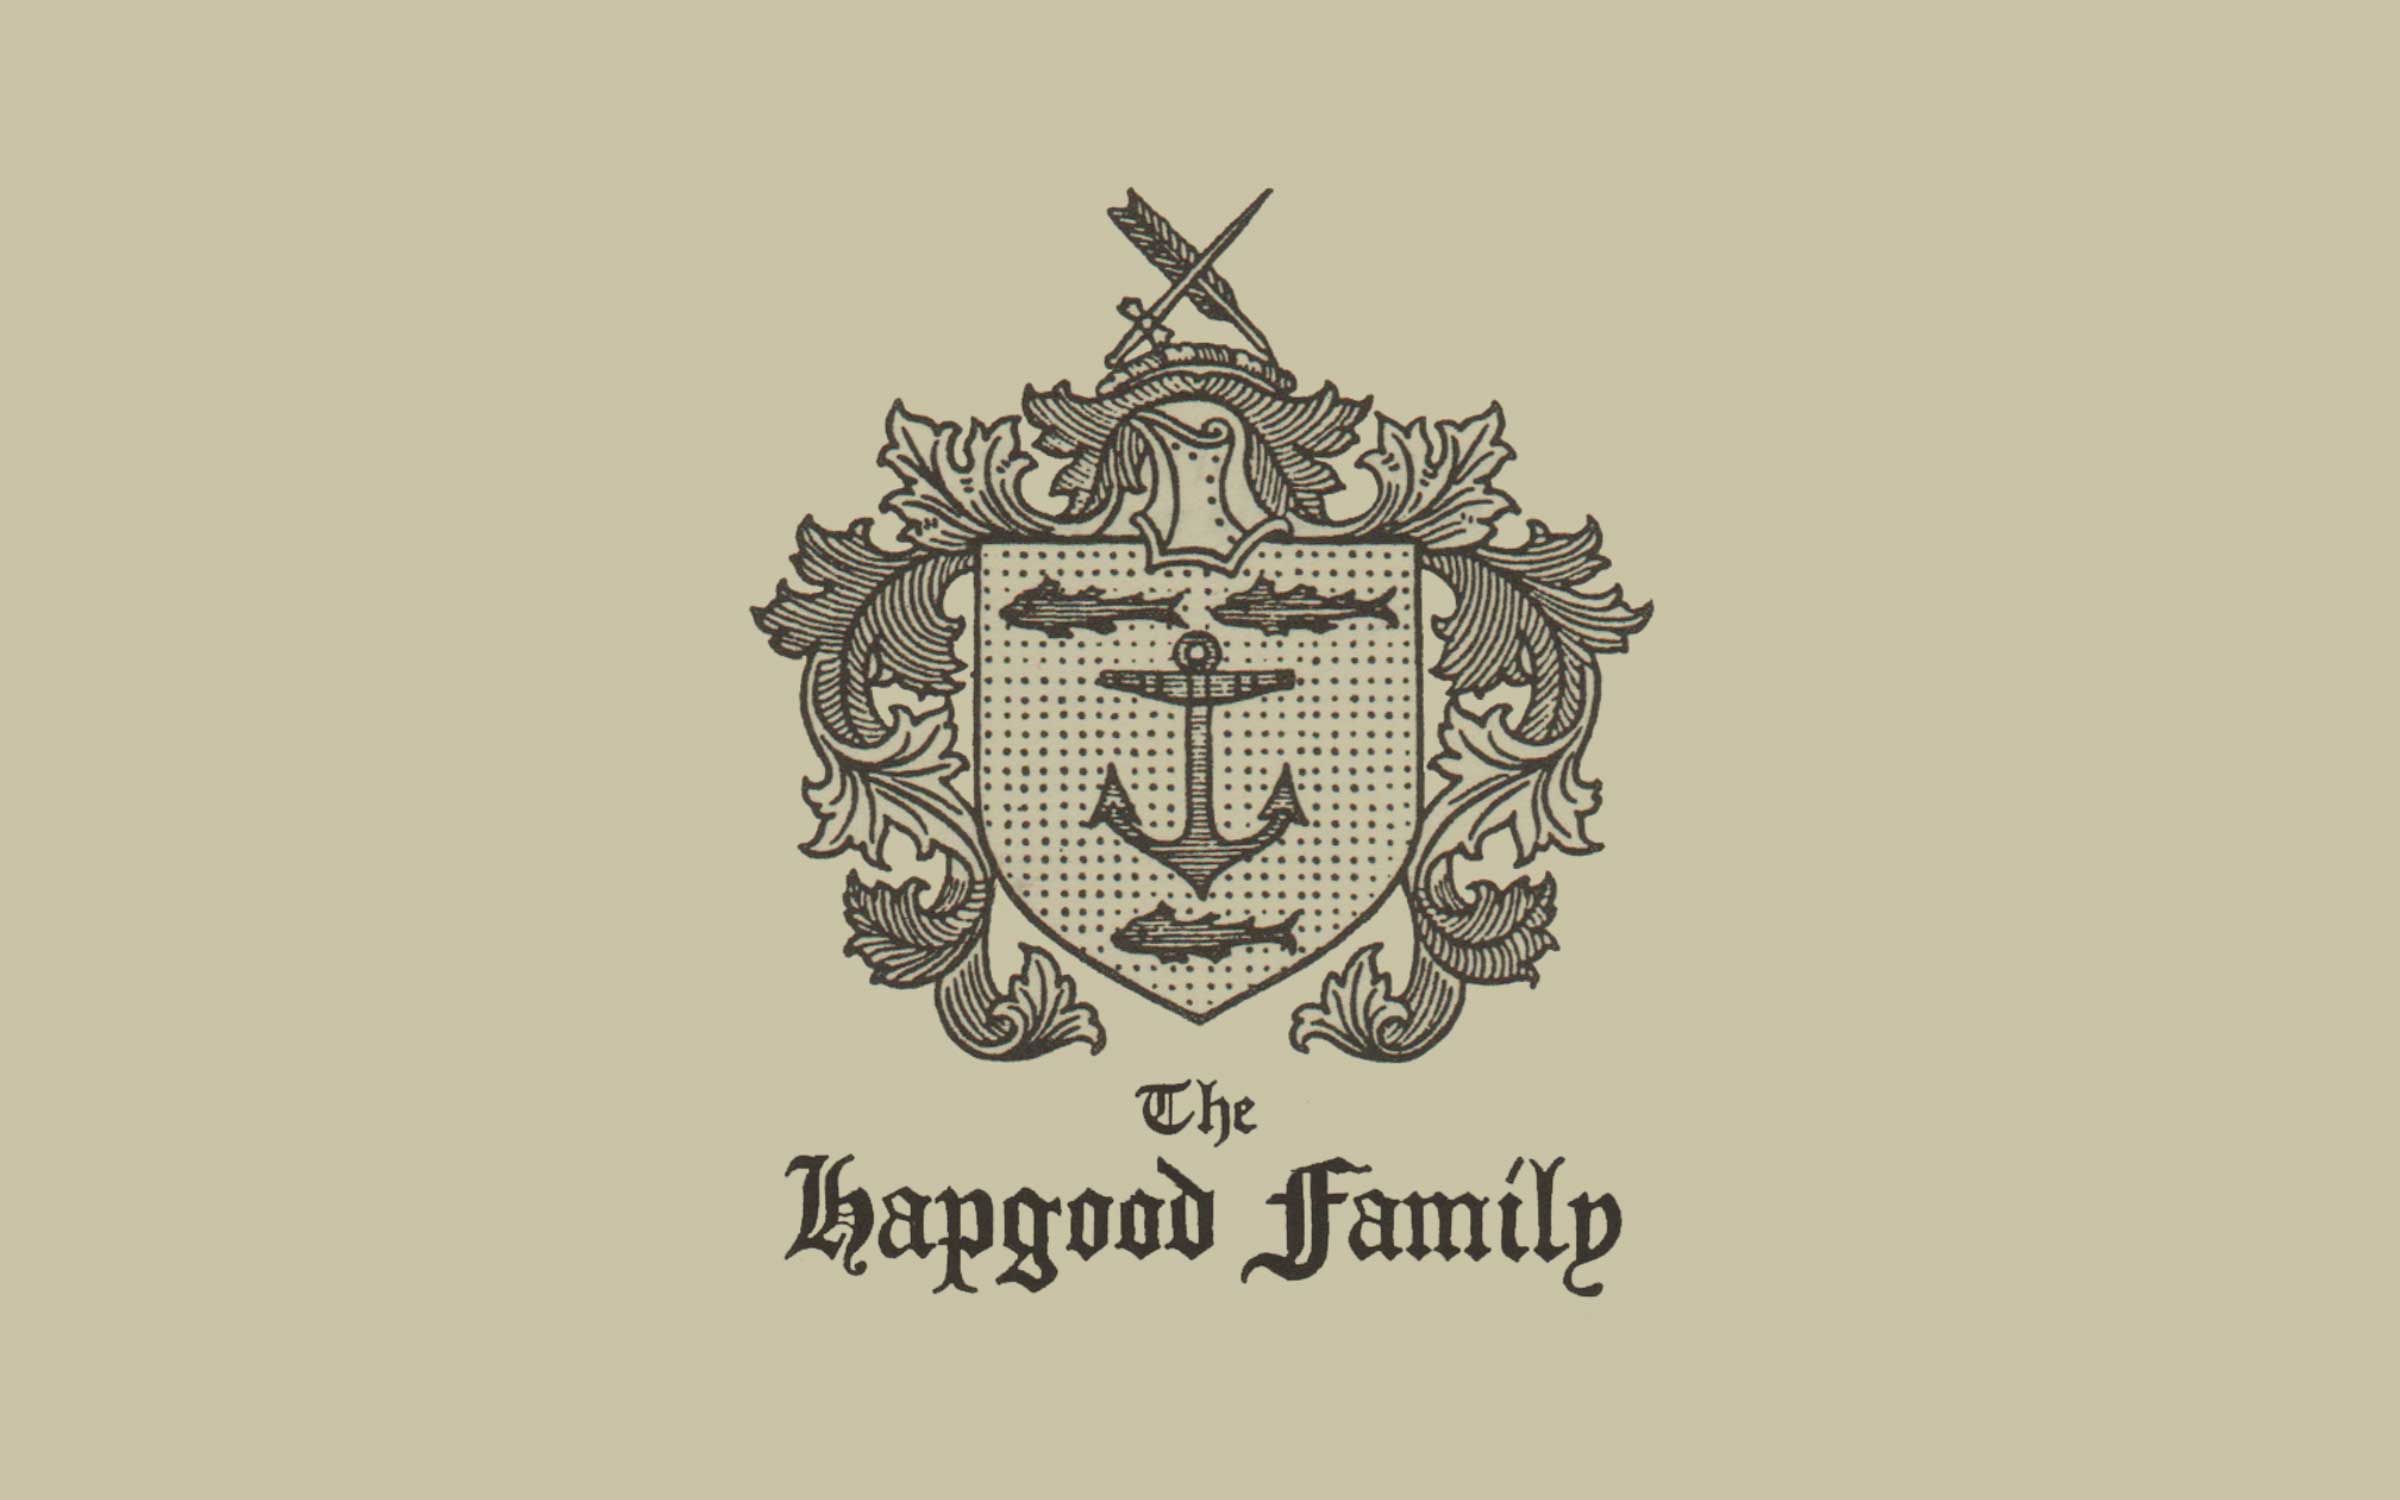 The Hapgood Family coat of arms and cool hand-done Blackletter typeface.